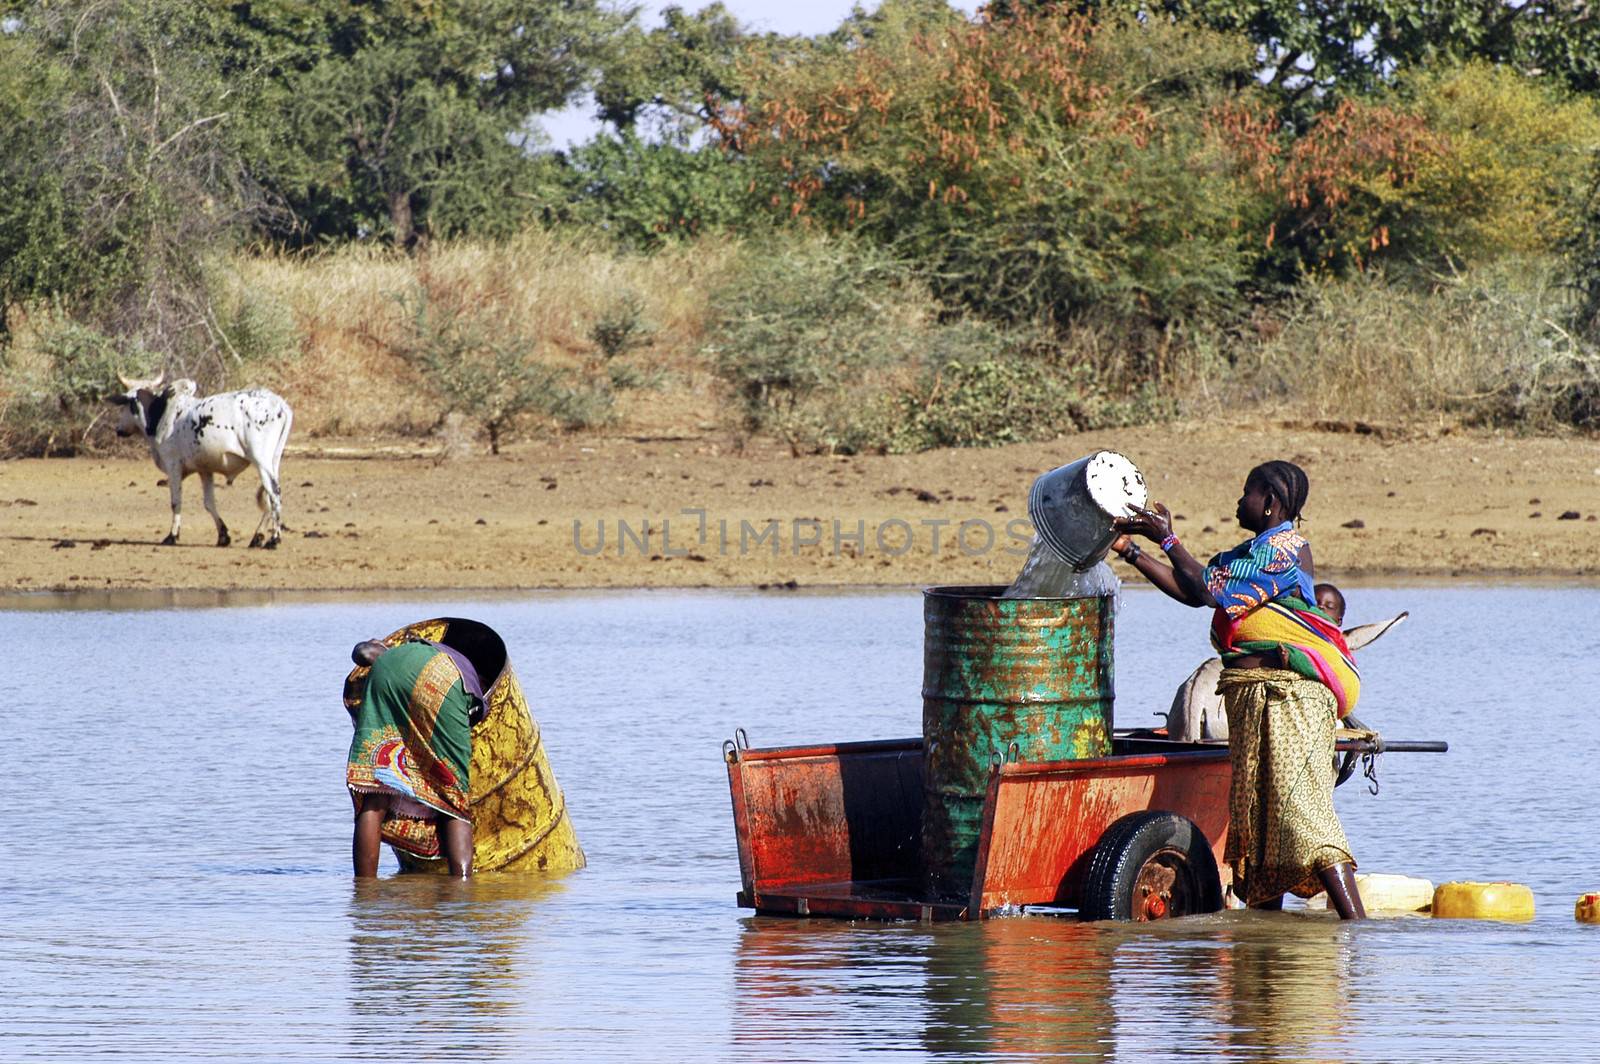 filling and transportation of water bottles at lake is for women to irrigate crops